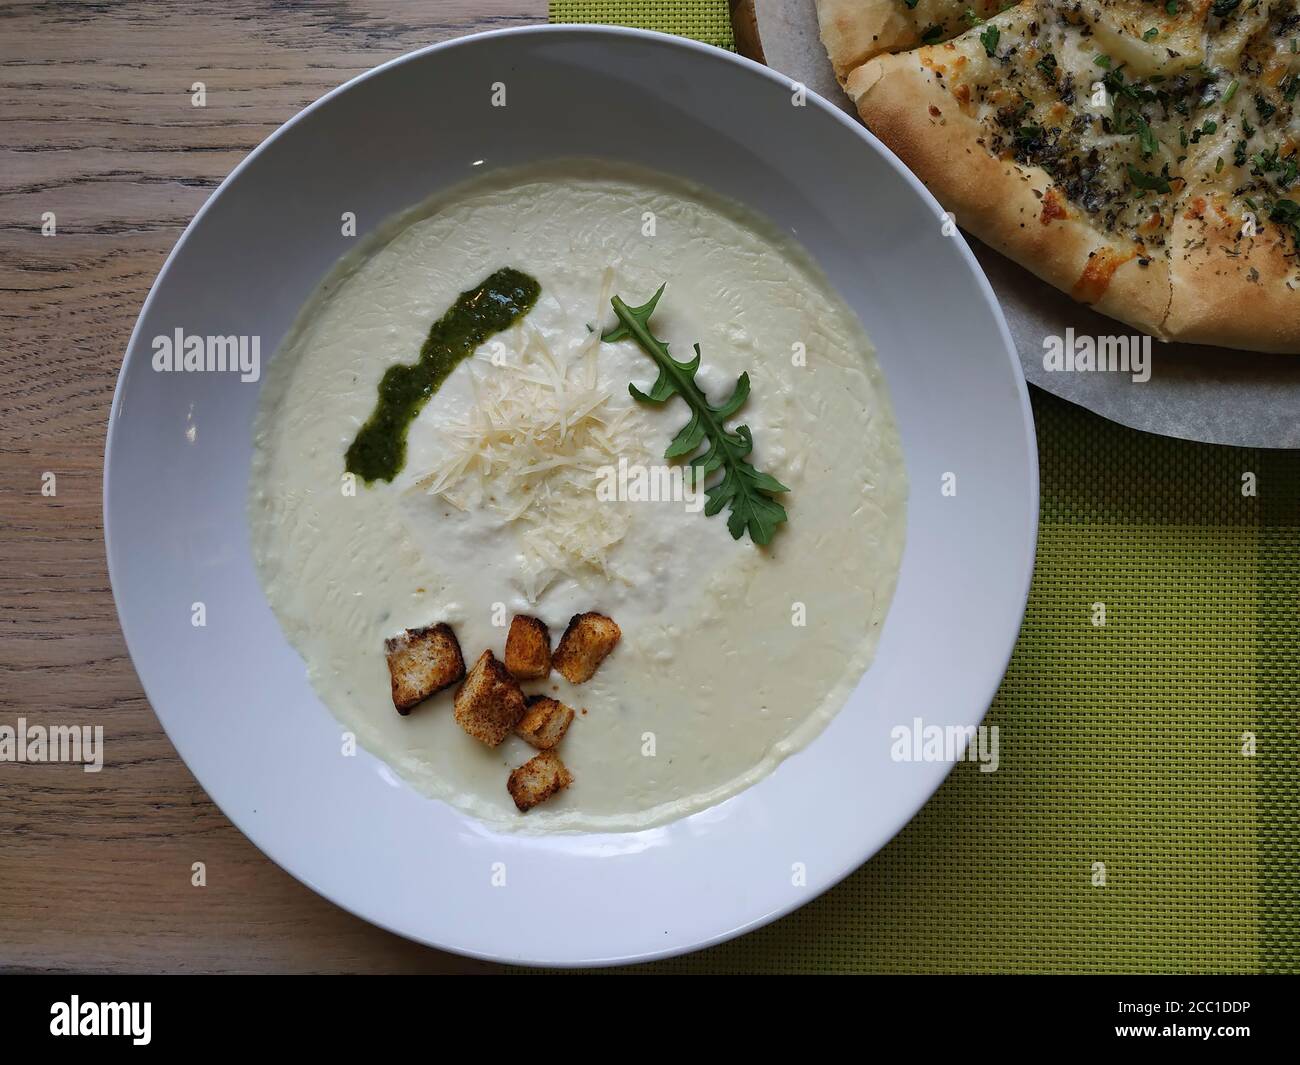 CHEESE CREAM SOUP WITH CRUTONS. In a deep plate, sprinkled with parmesan, a sprig of greens Stock Photo